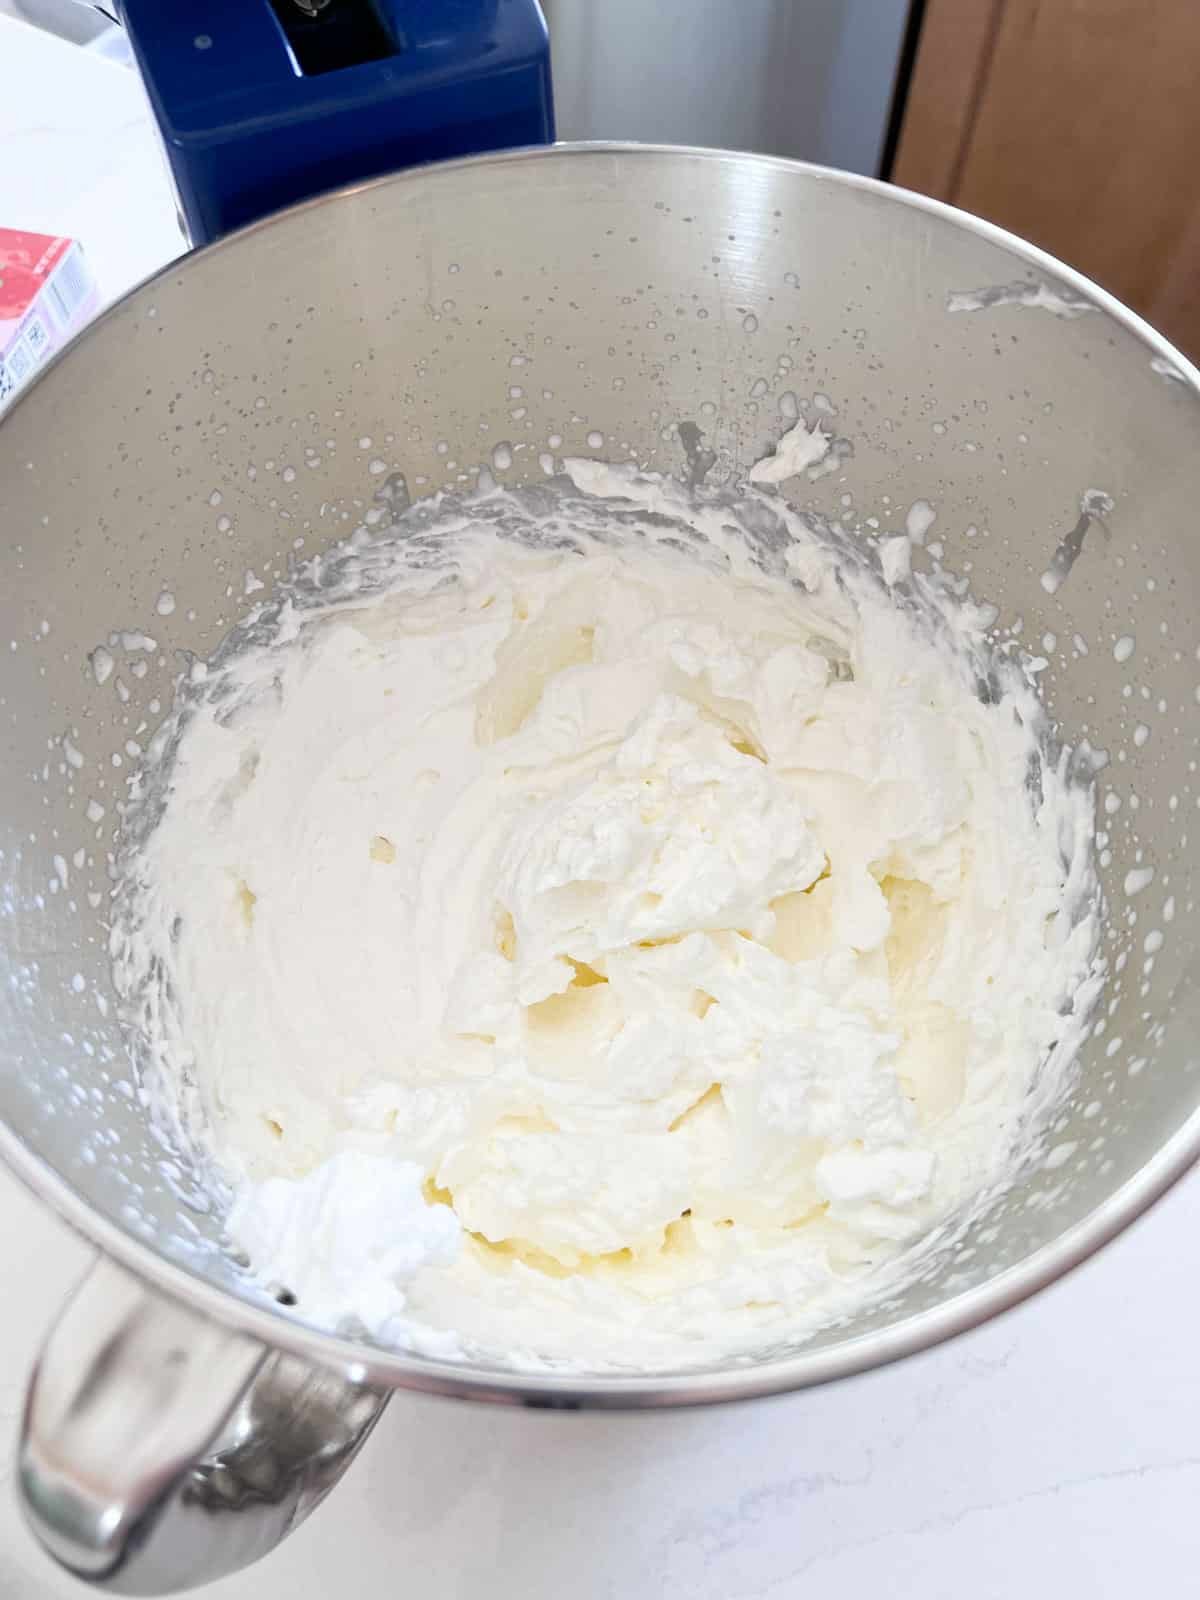 Whipped cream in a stand mixer bowl after being whipped in to stiff peaks.